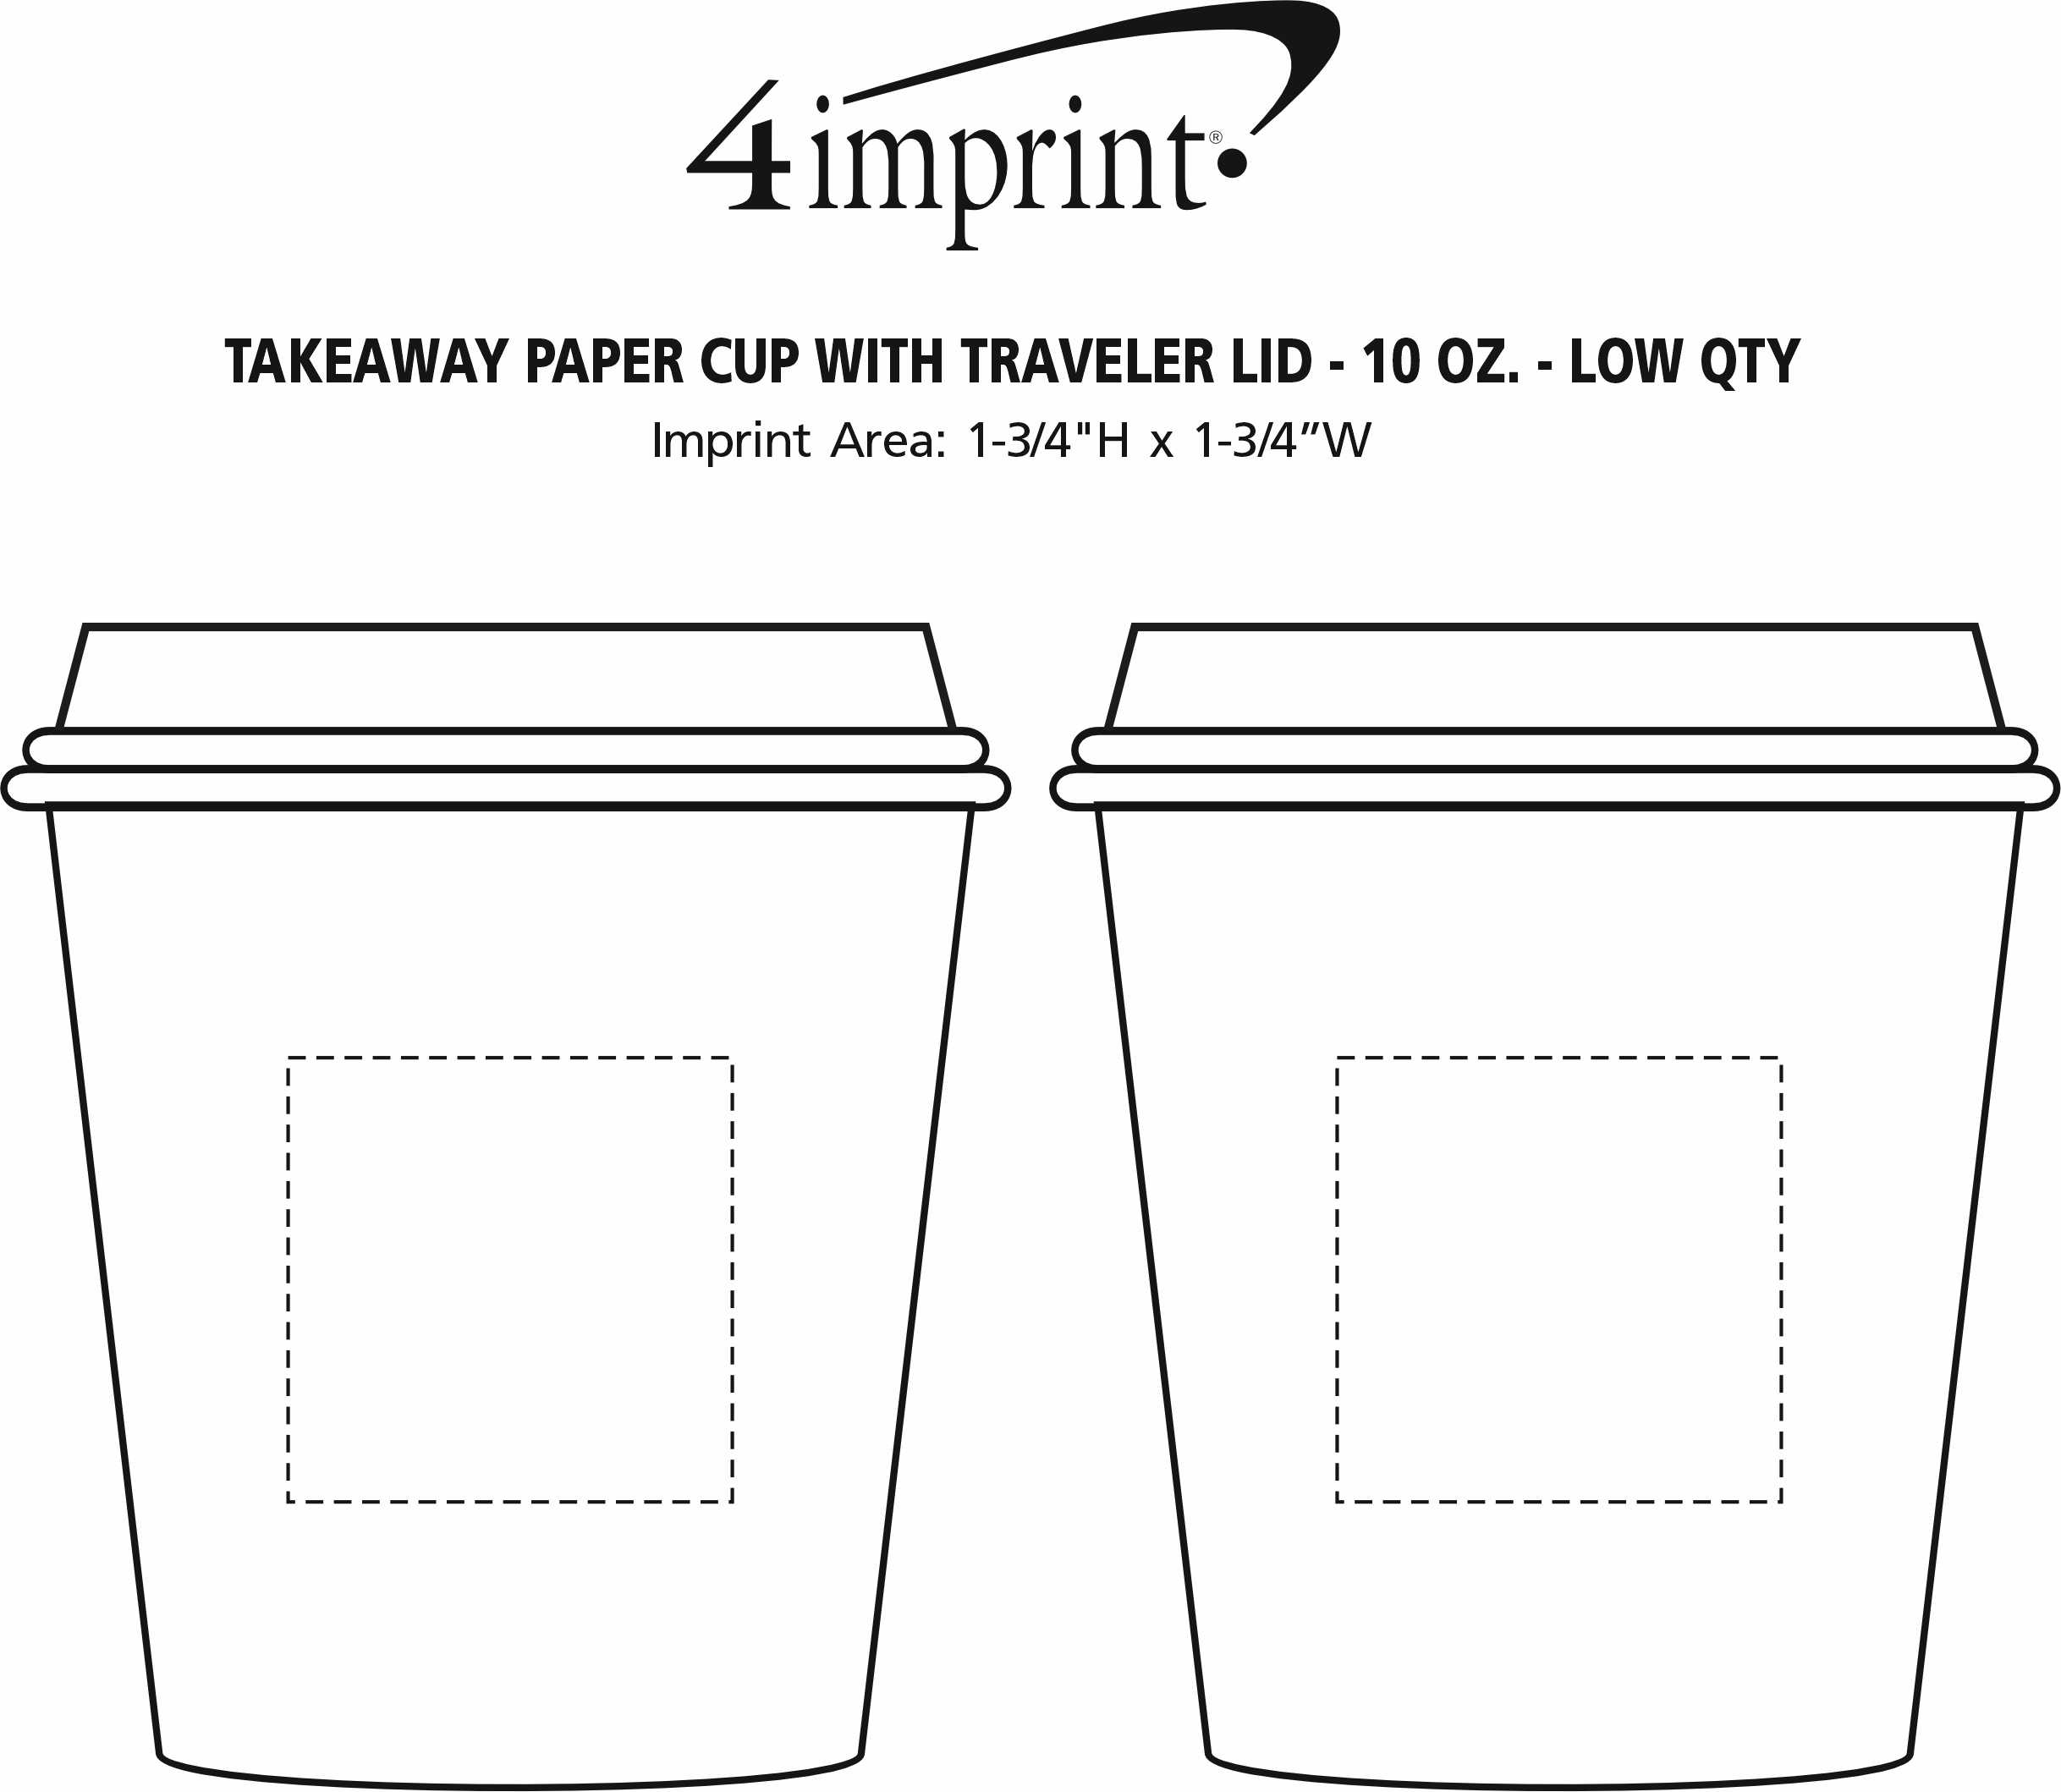 Imprint Area of Takeaway Paper Cup with Traveler Lid - 10 oz. - Low Qty